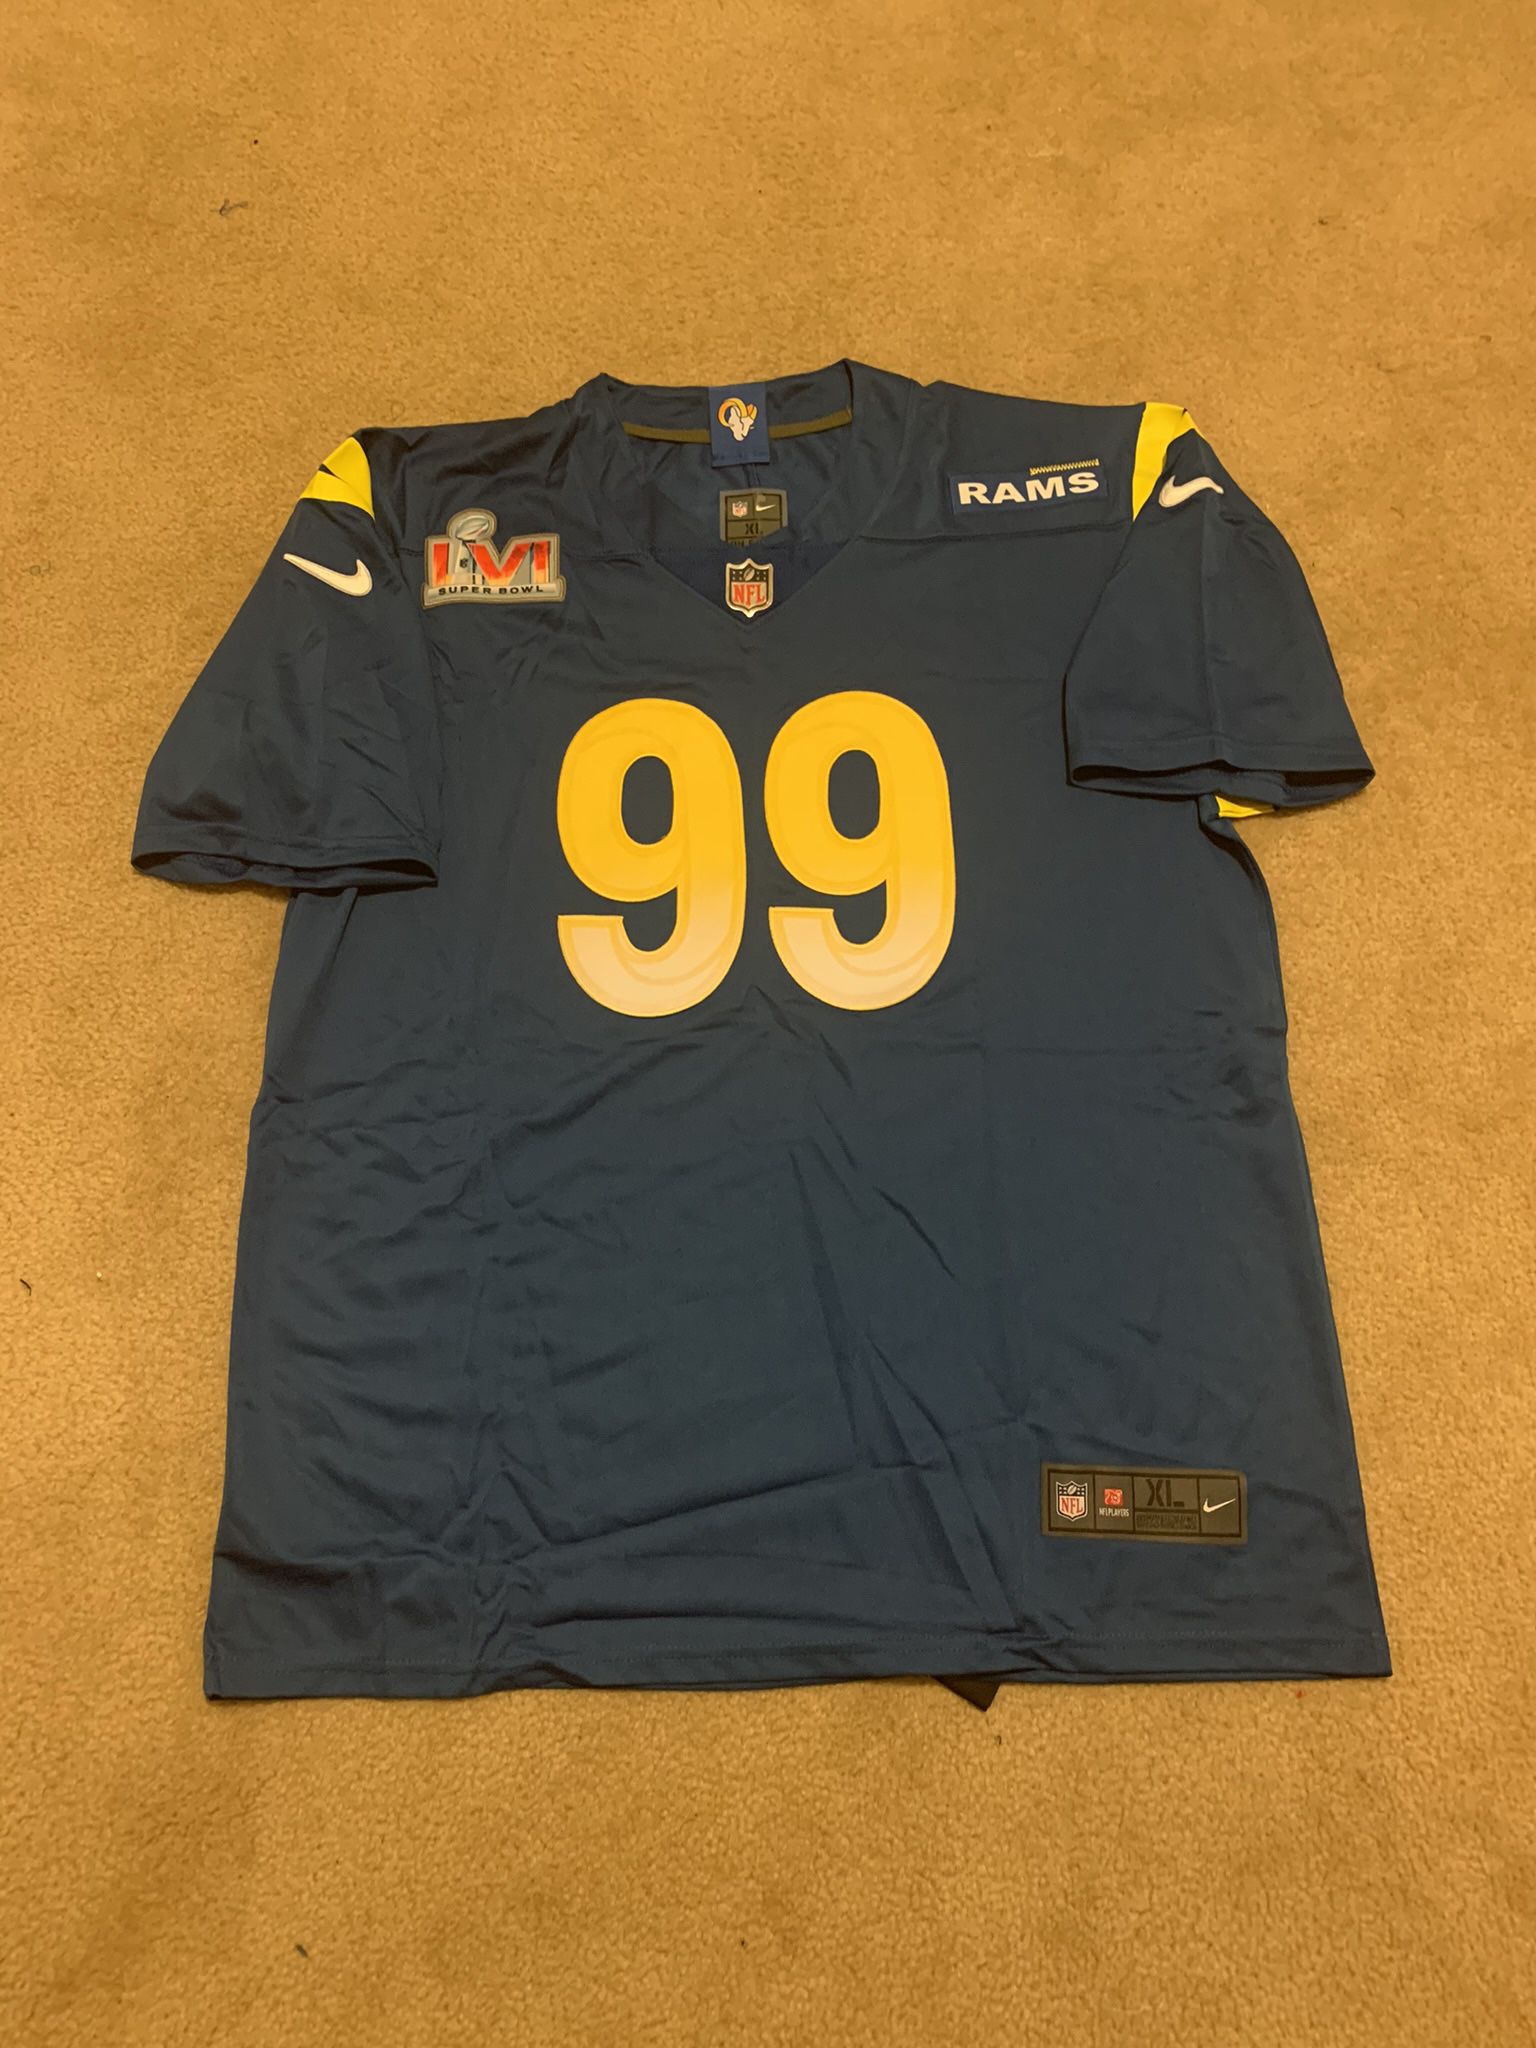 aaron donald jersey for sale